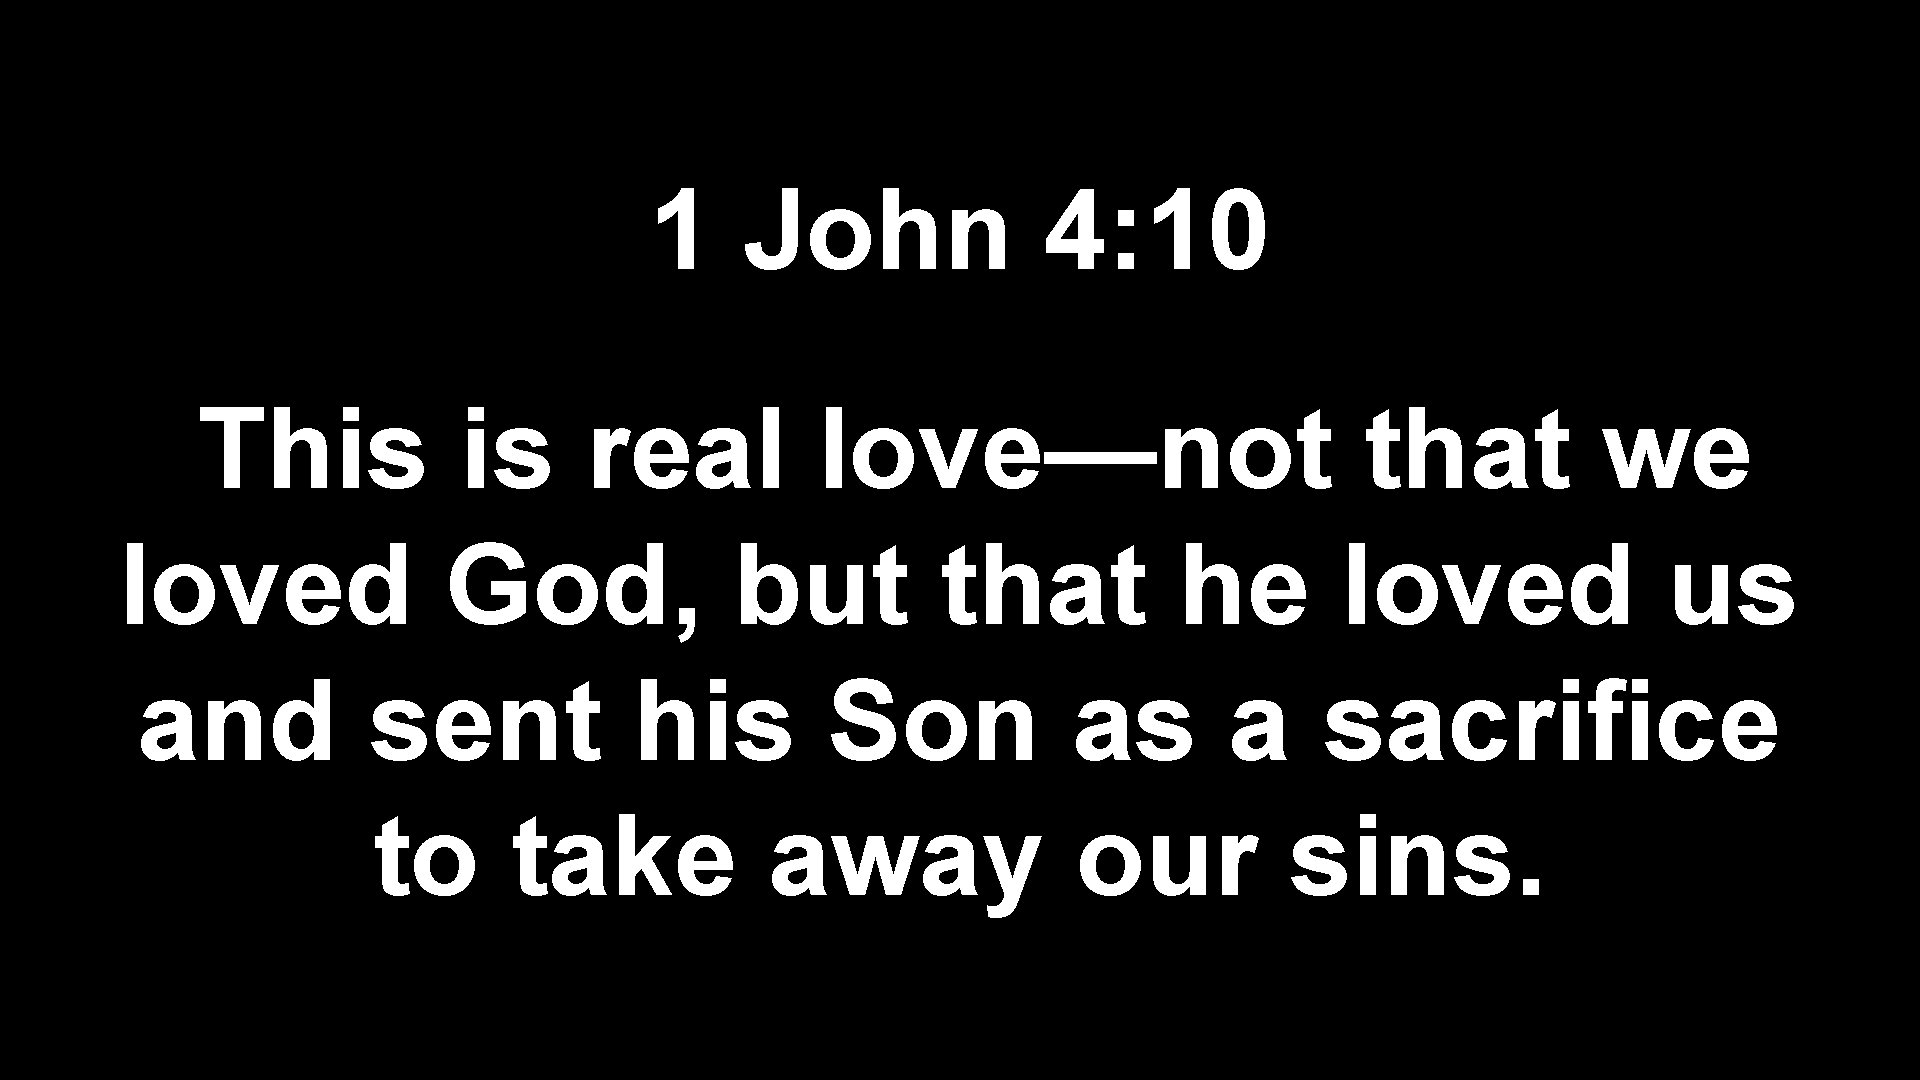 1 John 4: 10 This is real love—not that we loved God, but that